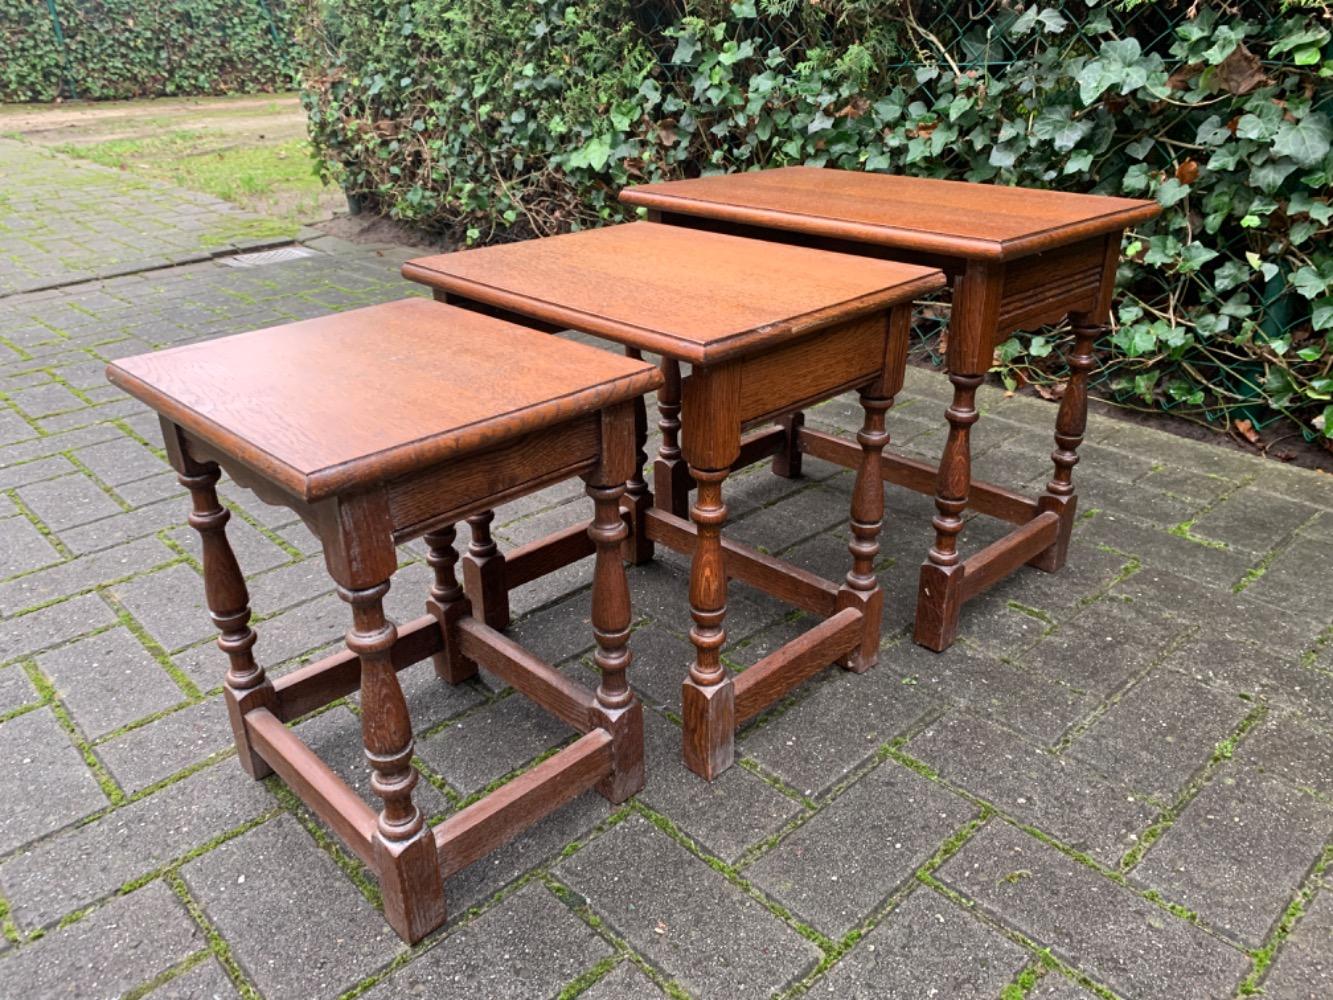 Rustique style Nest of tables